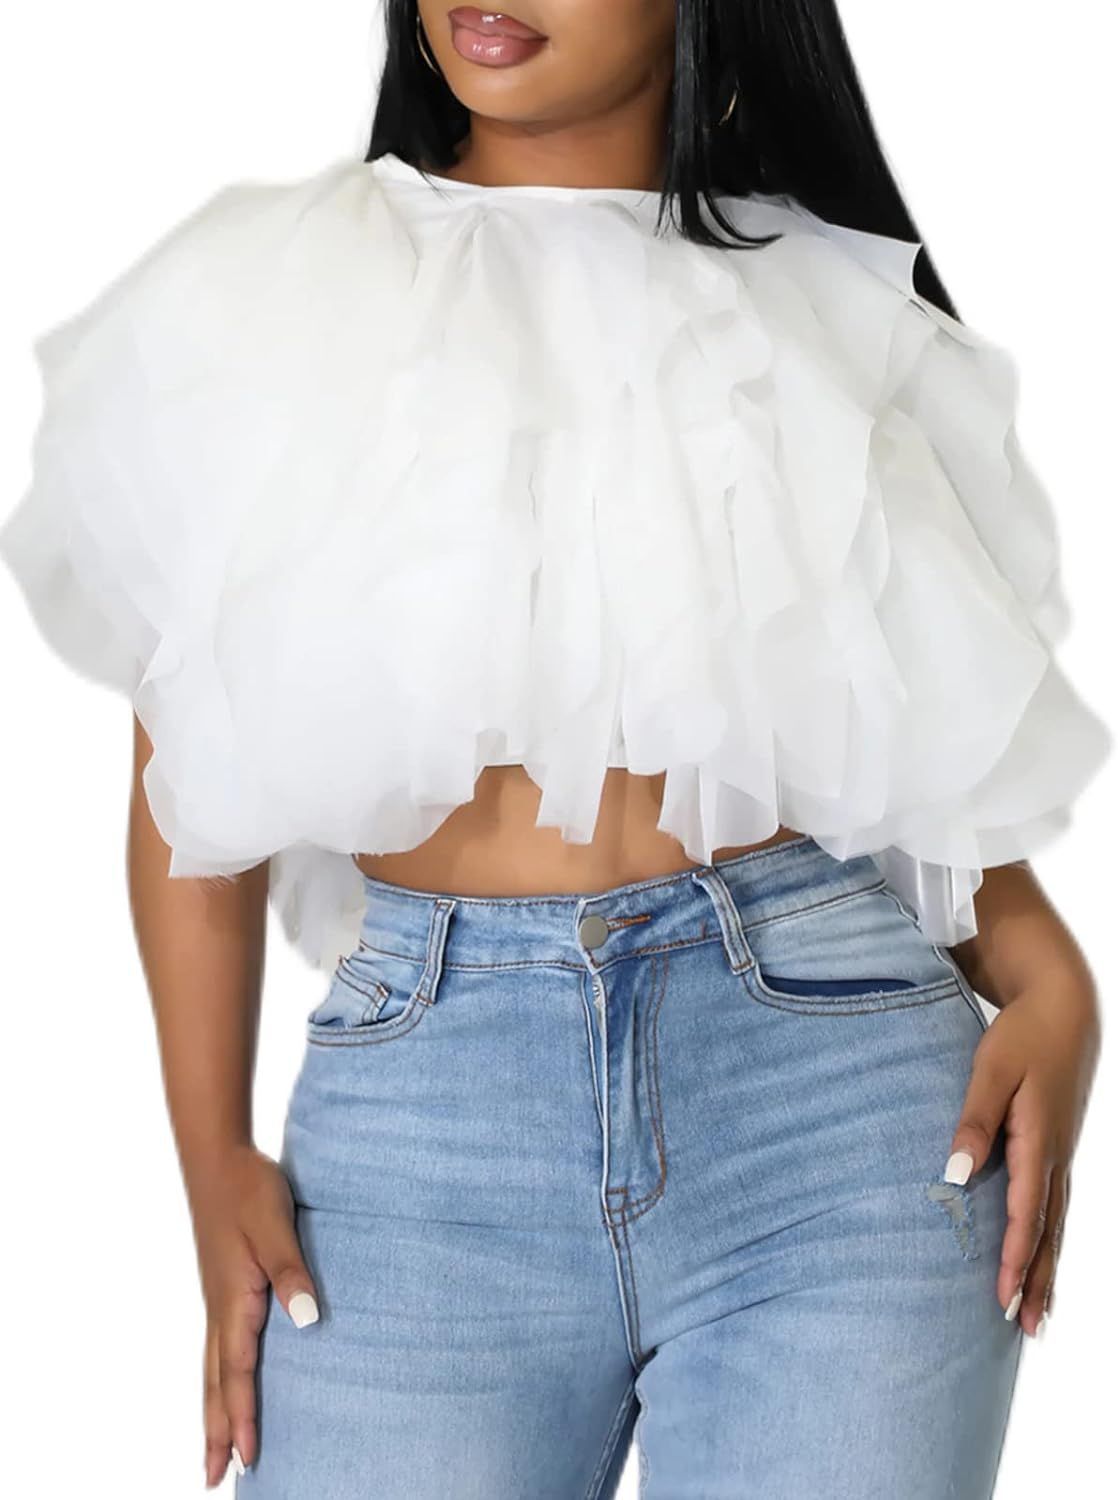 Ekaliy Women's Casual Flowy Puffy Tulle Short Blouse Layered Tops White S at Amazon Women’s Clo... | Amazon (US)